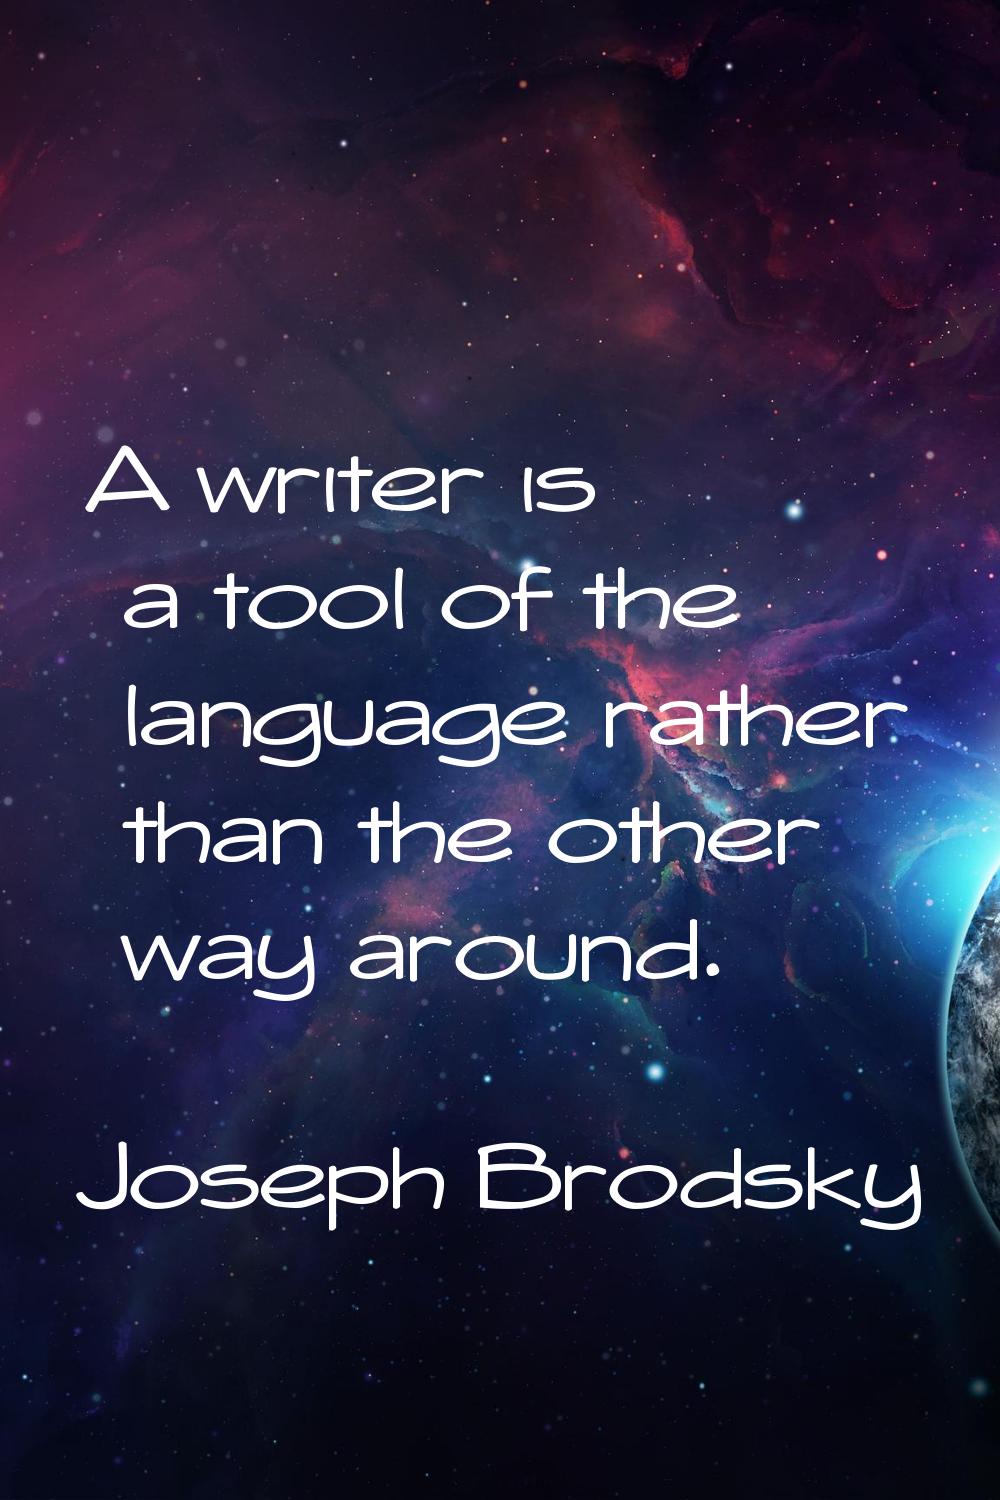 A writer is a tool of the language rather than the other way around.